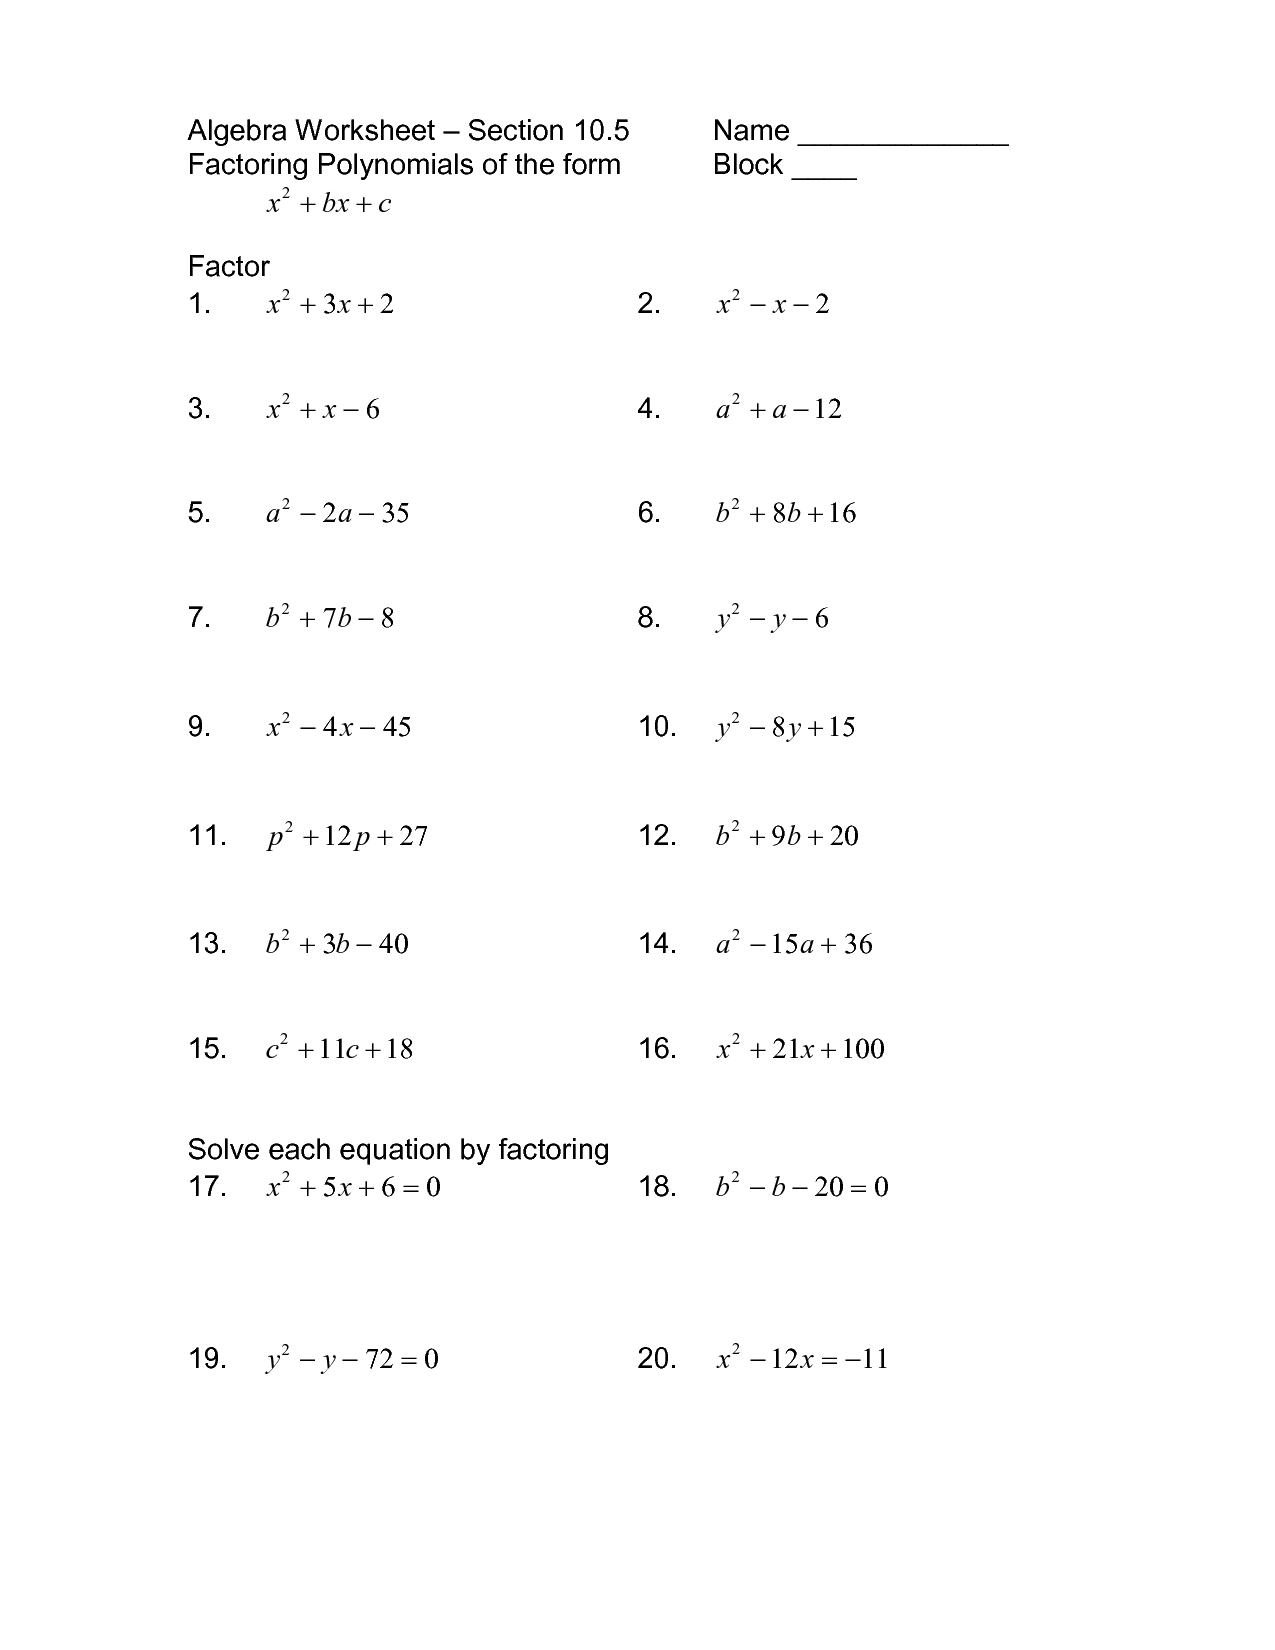 Algebra 2 Factoring Worksheets with Answers Image